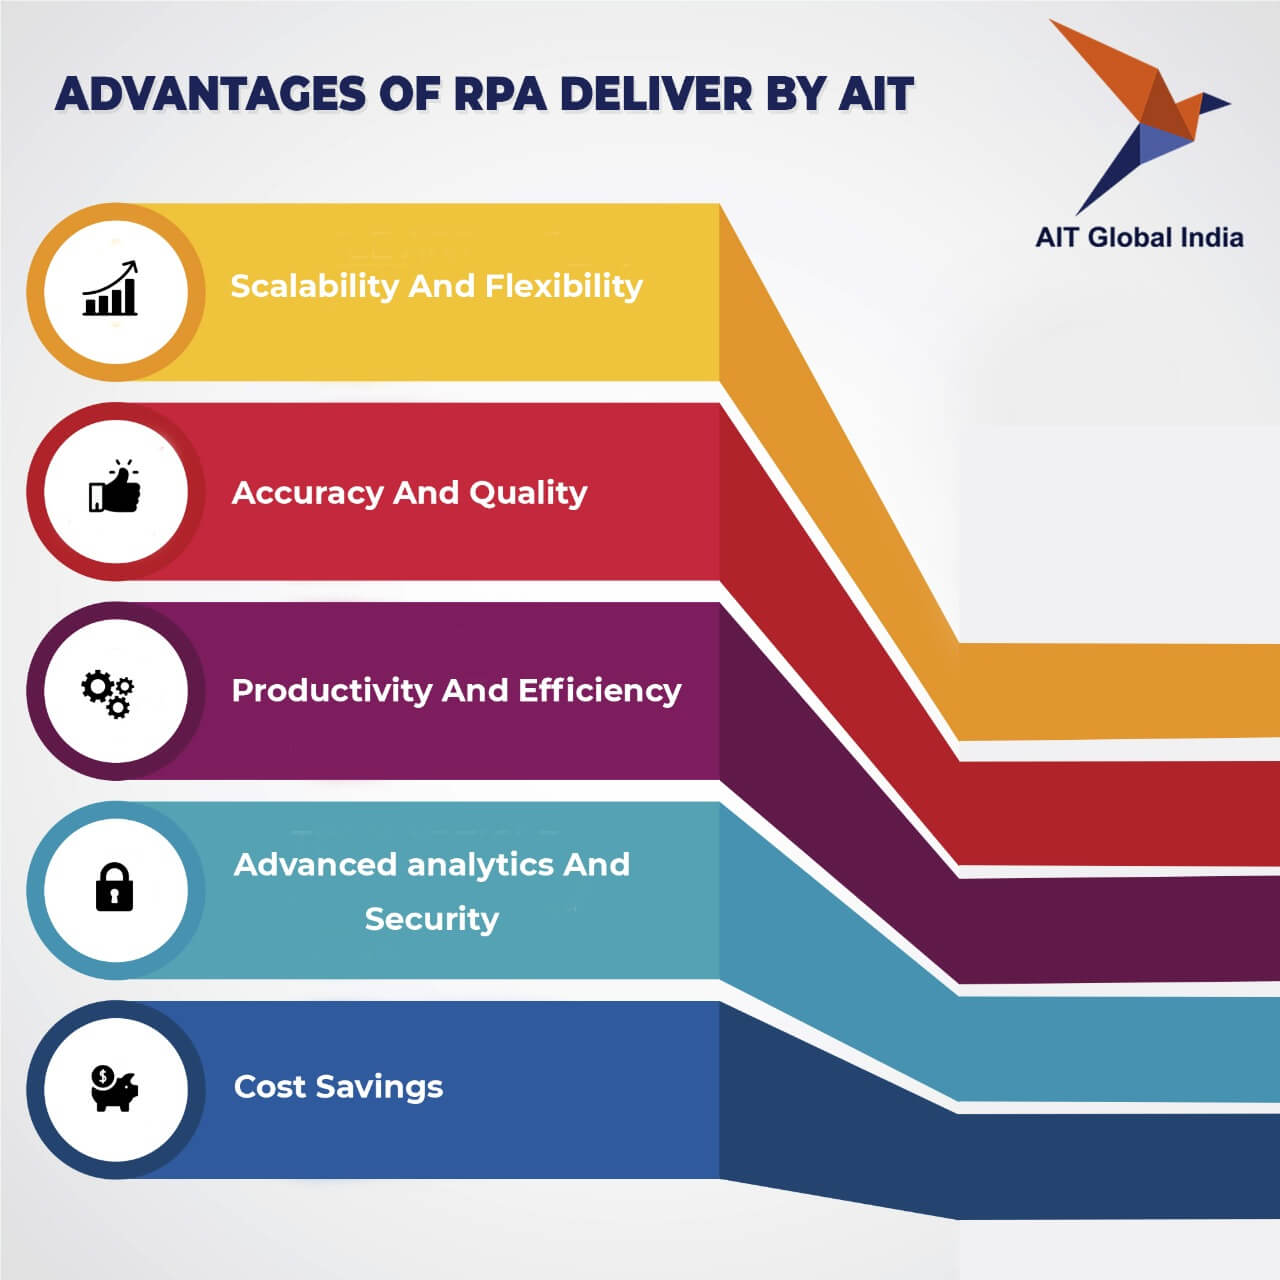 Advantages of RPA And Tools Used By AIT To Deliver Best RPA Services